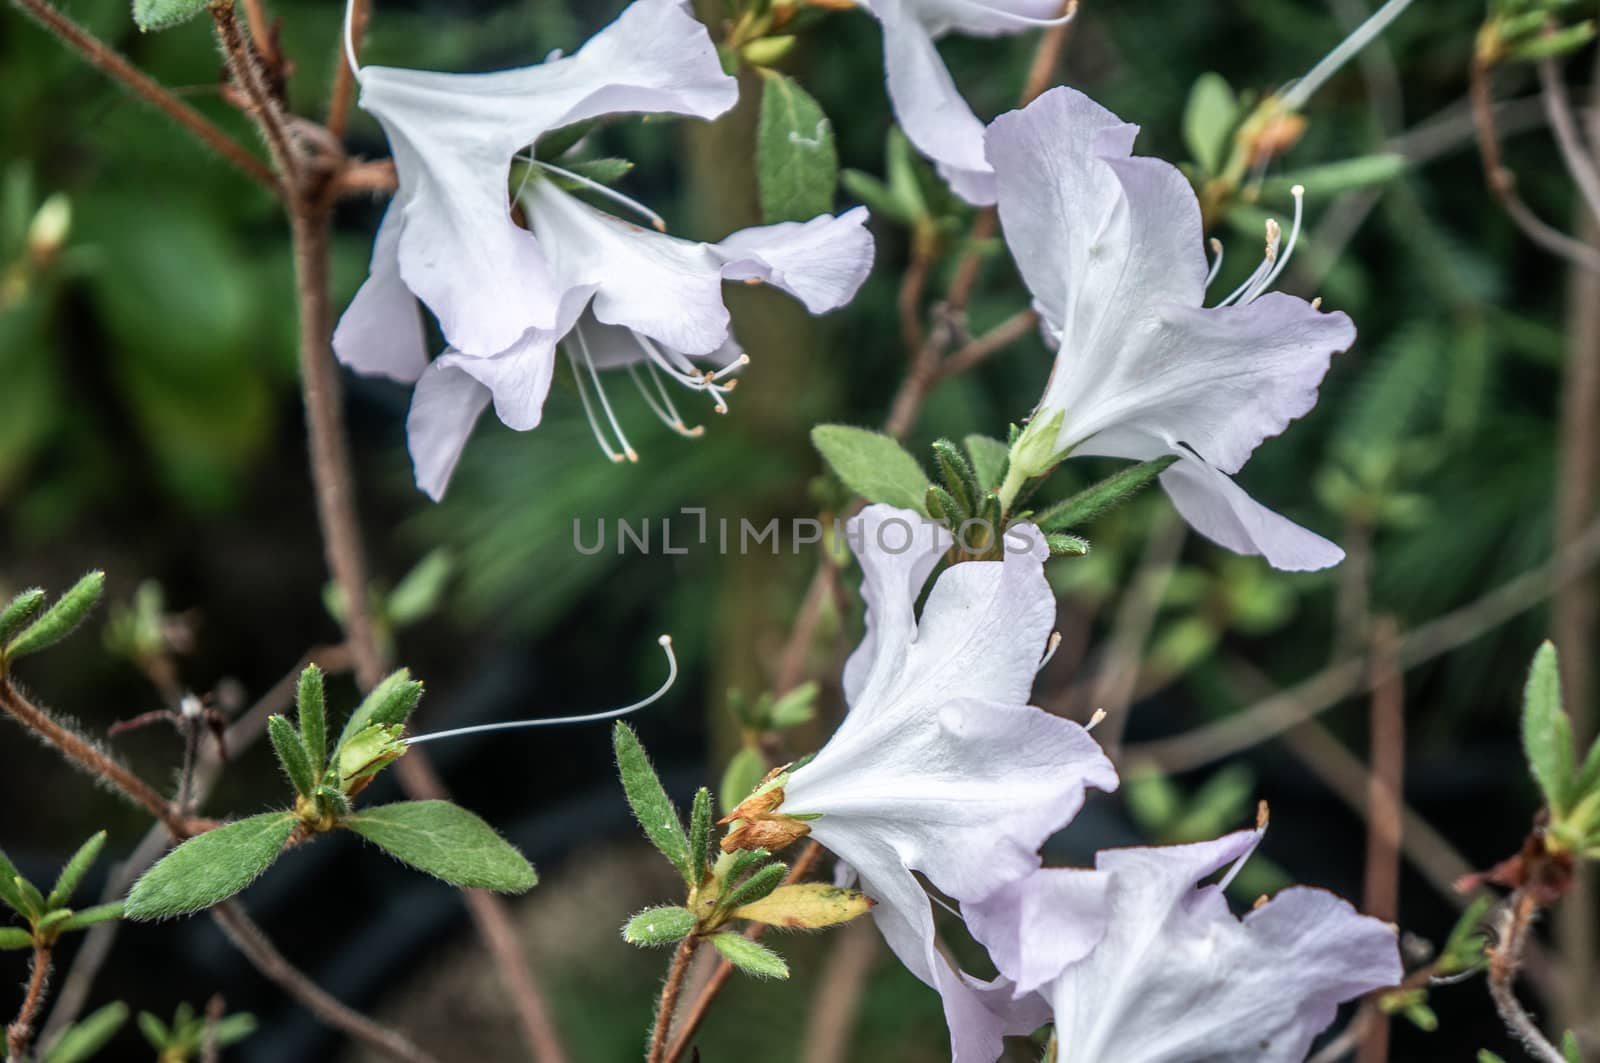 Bright white rhododendron bell shaped flowers in minimalist style shot in macro. Blurred green background in natural daylight and small dark leaves on brown branches.